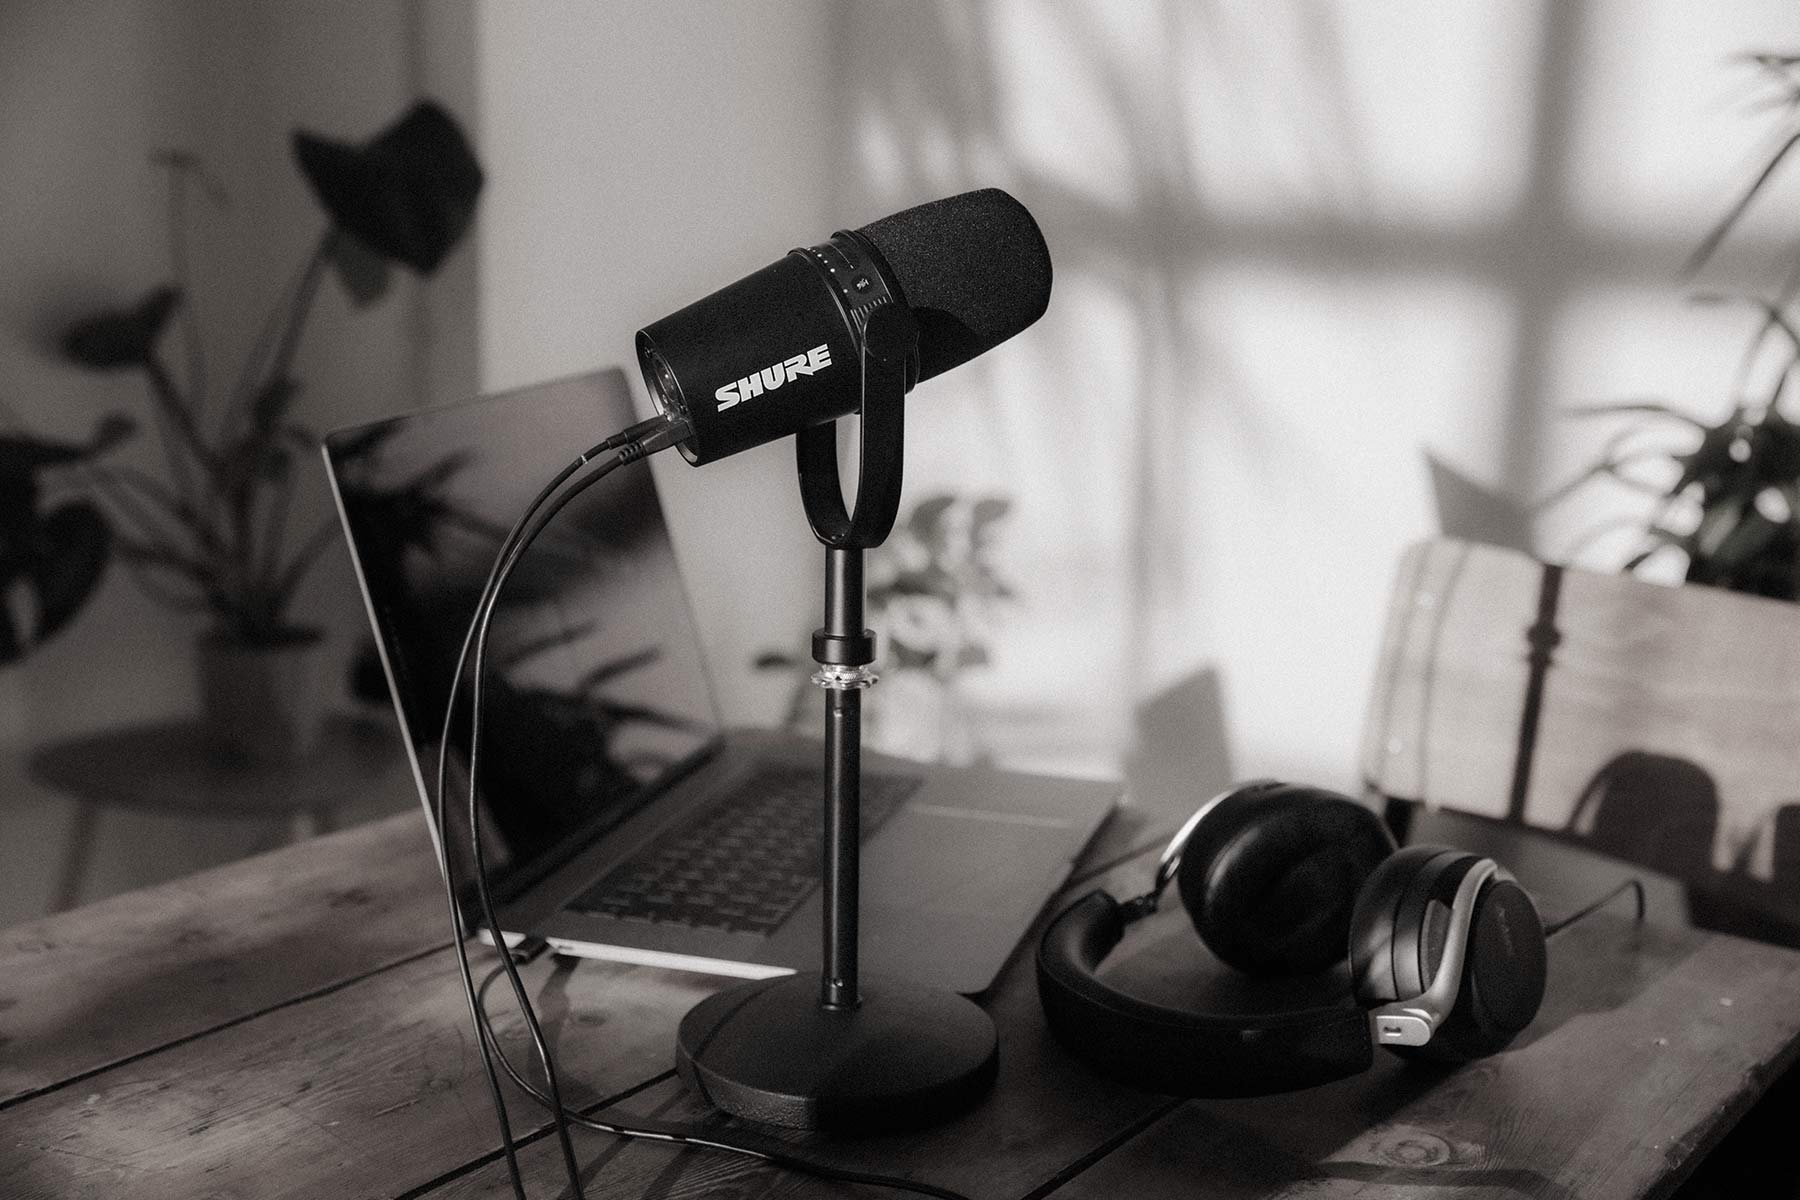 RS Recommends: Up your podcast quality with the Shure MV7